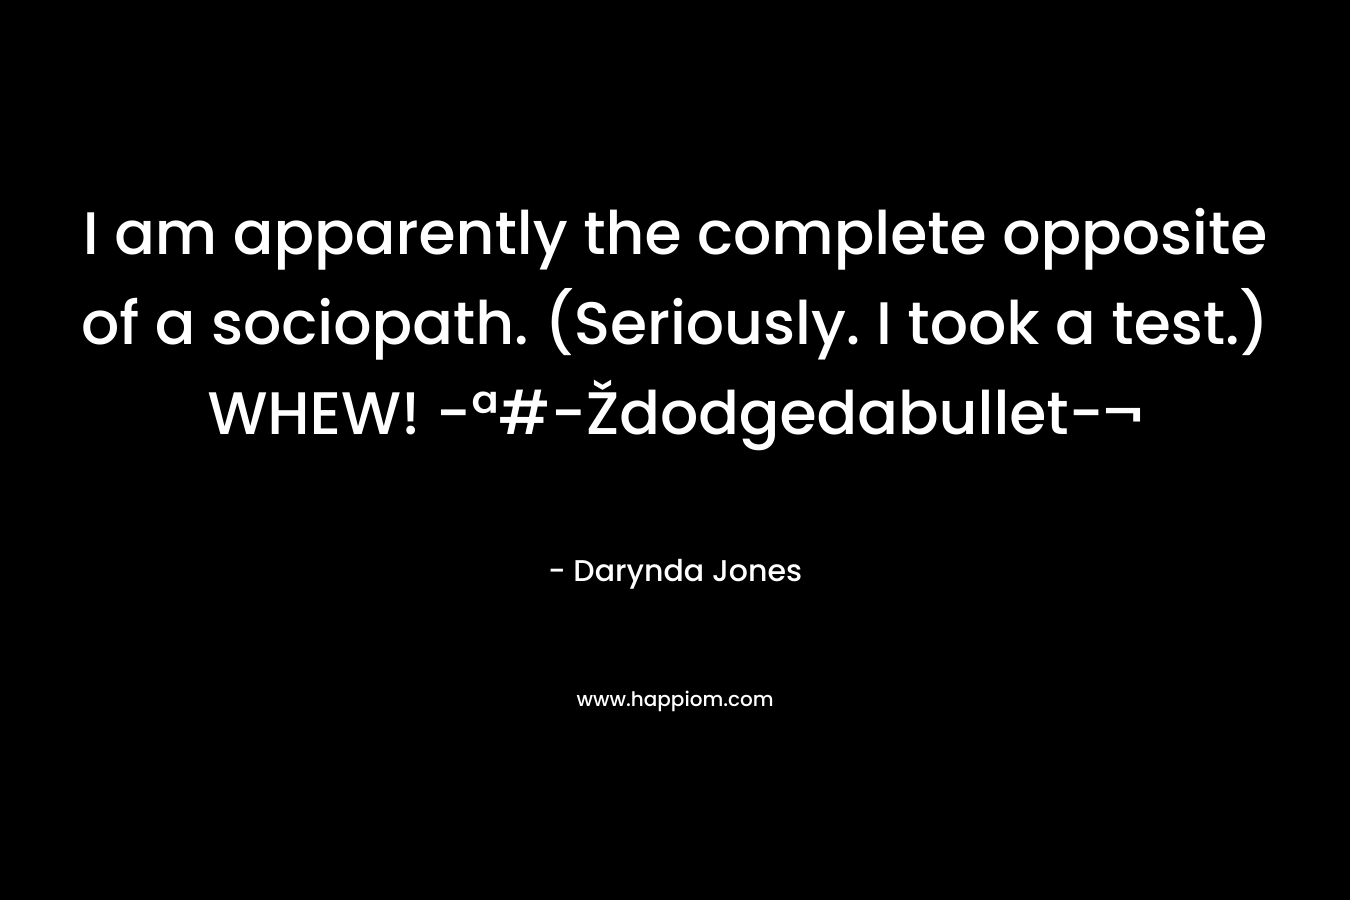 I am apparently the complete opposite of a sociopath. (Seriously. I took a test.) WHEW! -ª#-Ždodgedabullet-¬